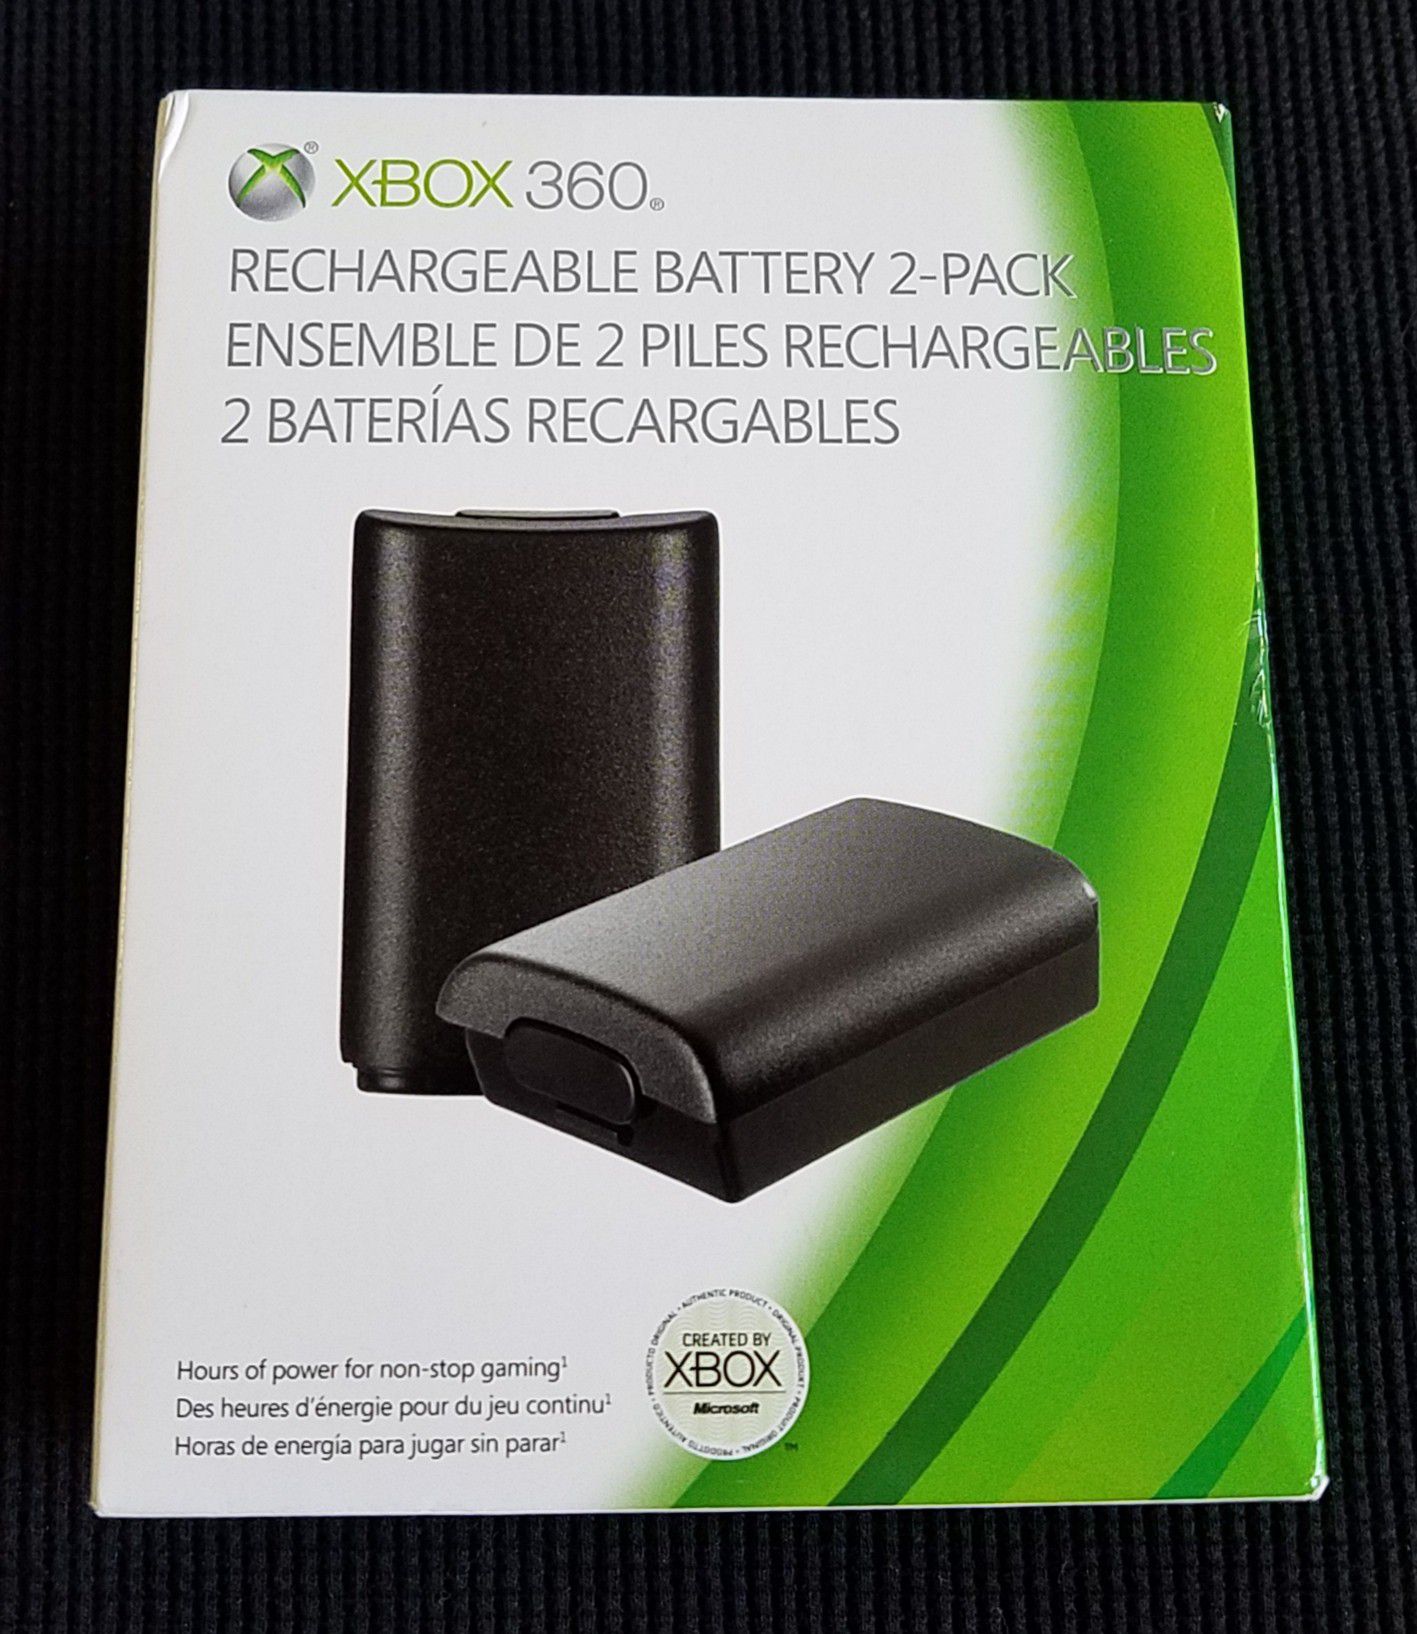 2011 MICROSOFT XBOX 360 2-Pack Rechargeable Battery